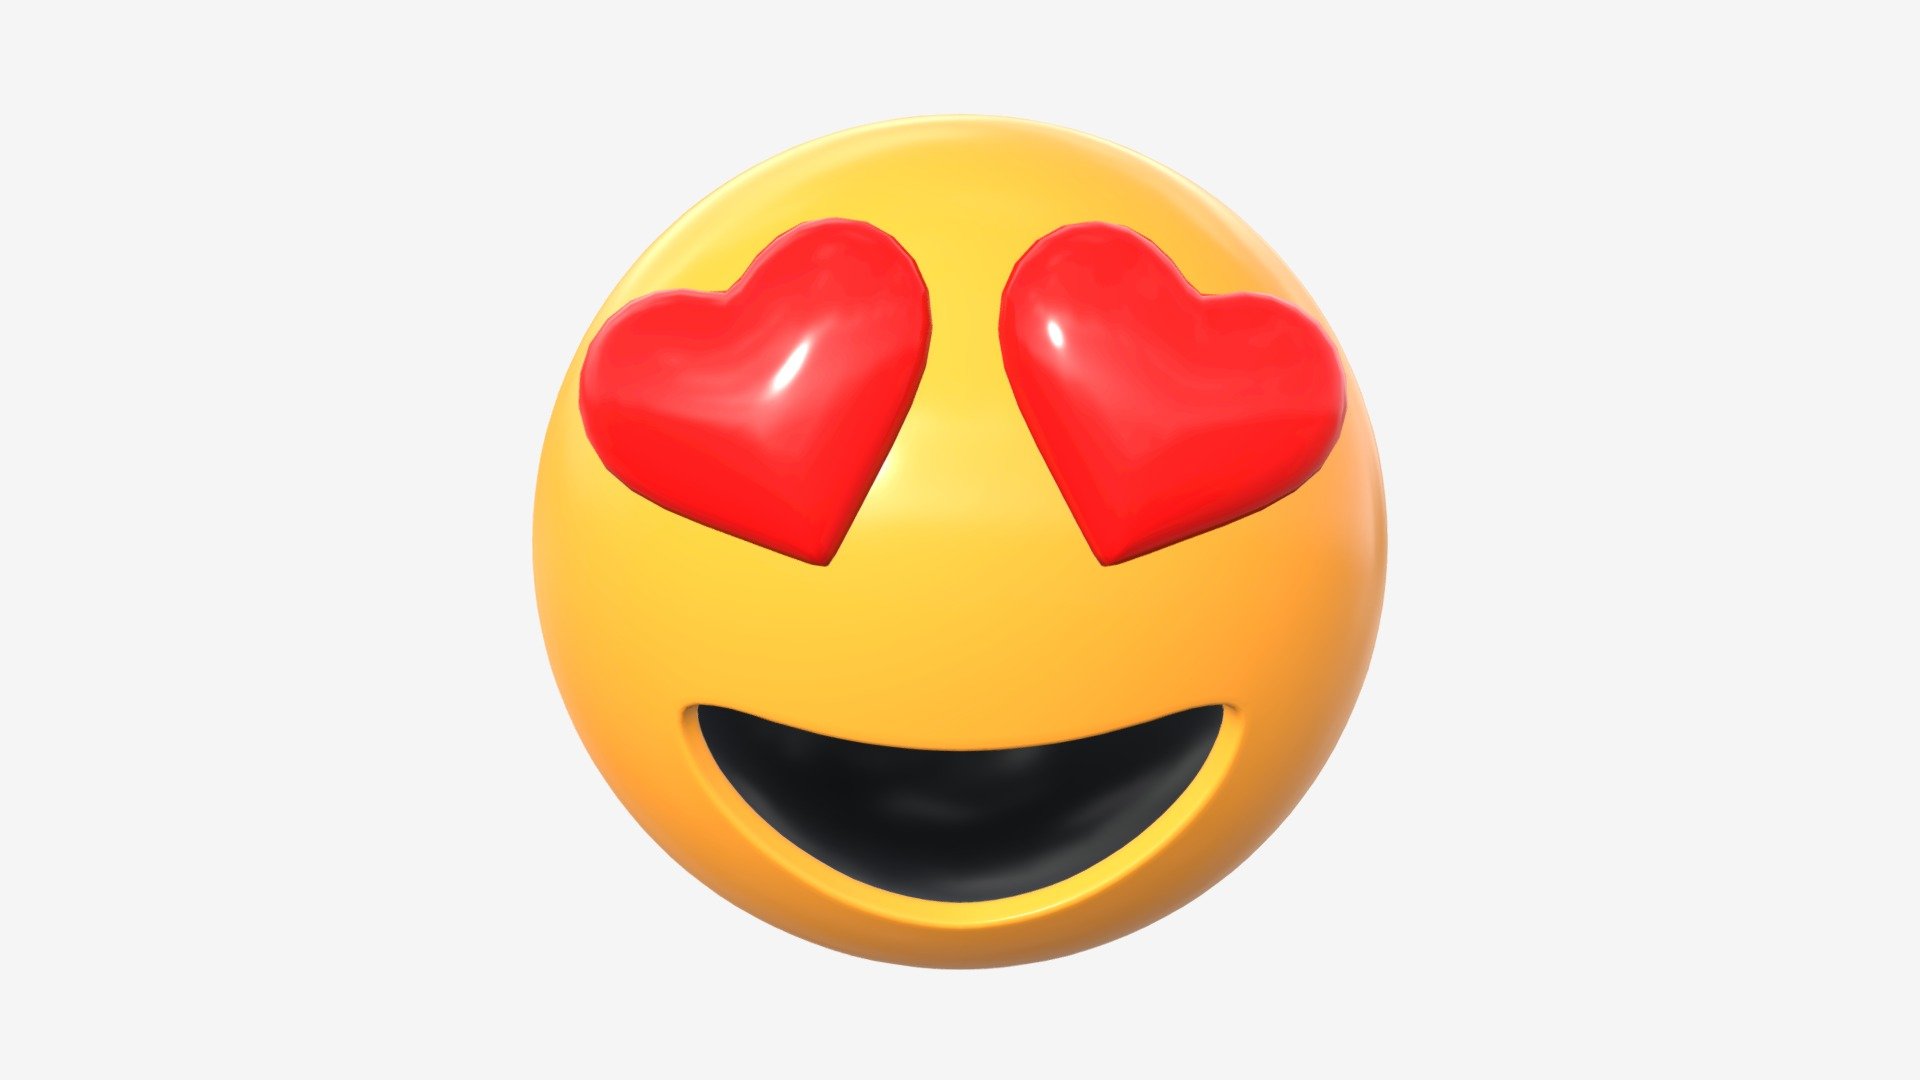 Emoji 052 Large smiling with heart shaped eyes - Buy Royalty Free 3D model by HQ3DMOD (@AivisAstics) 3d model